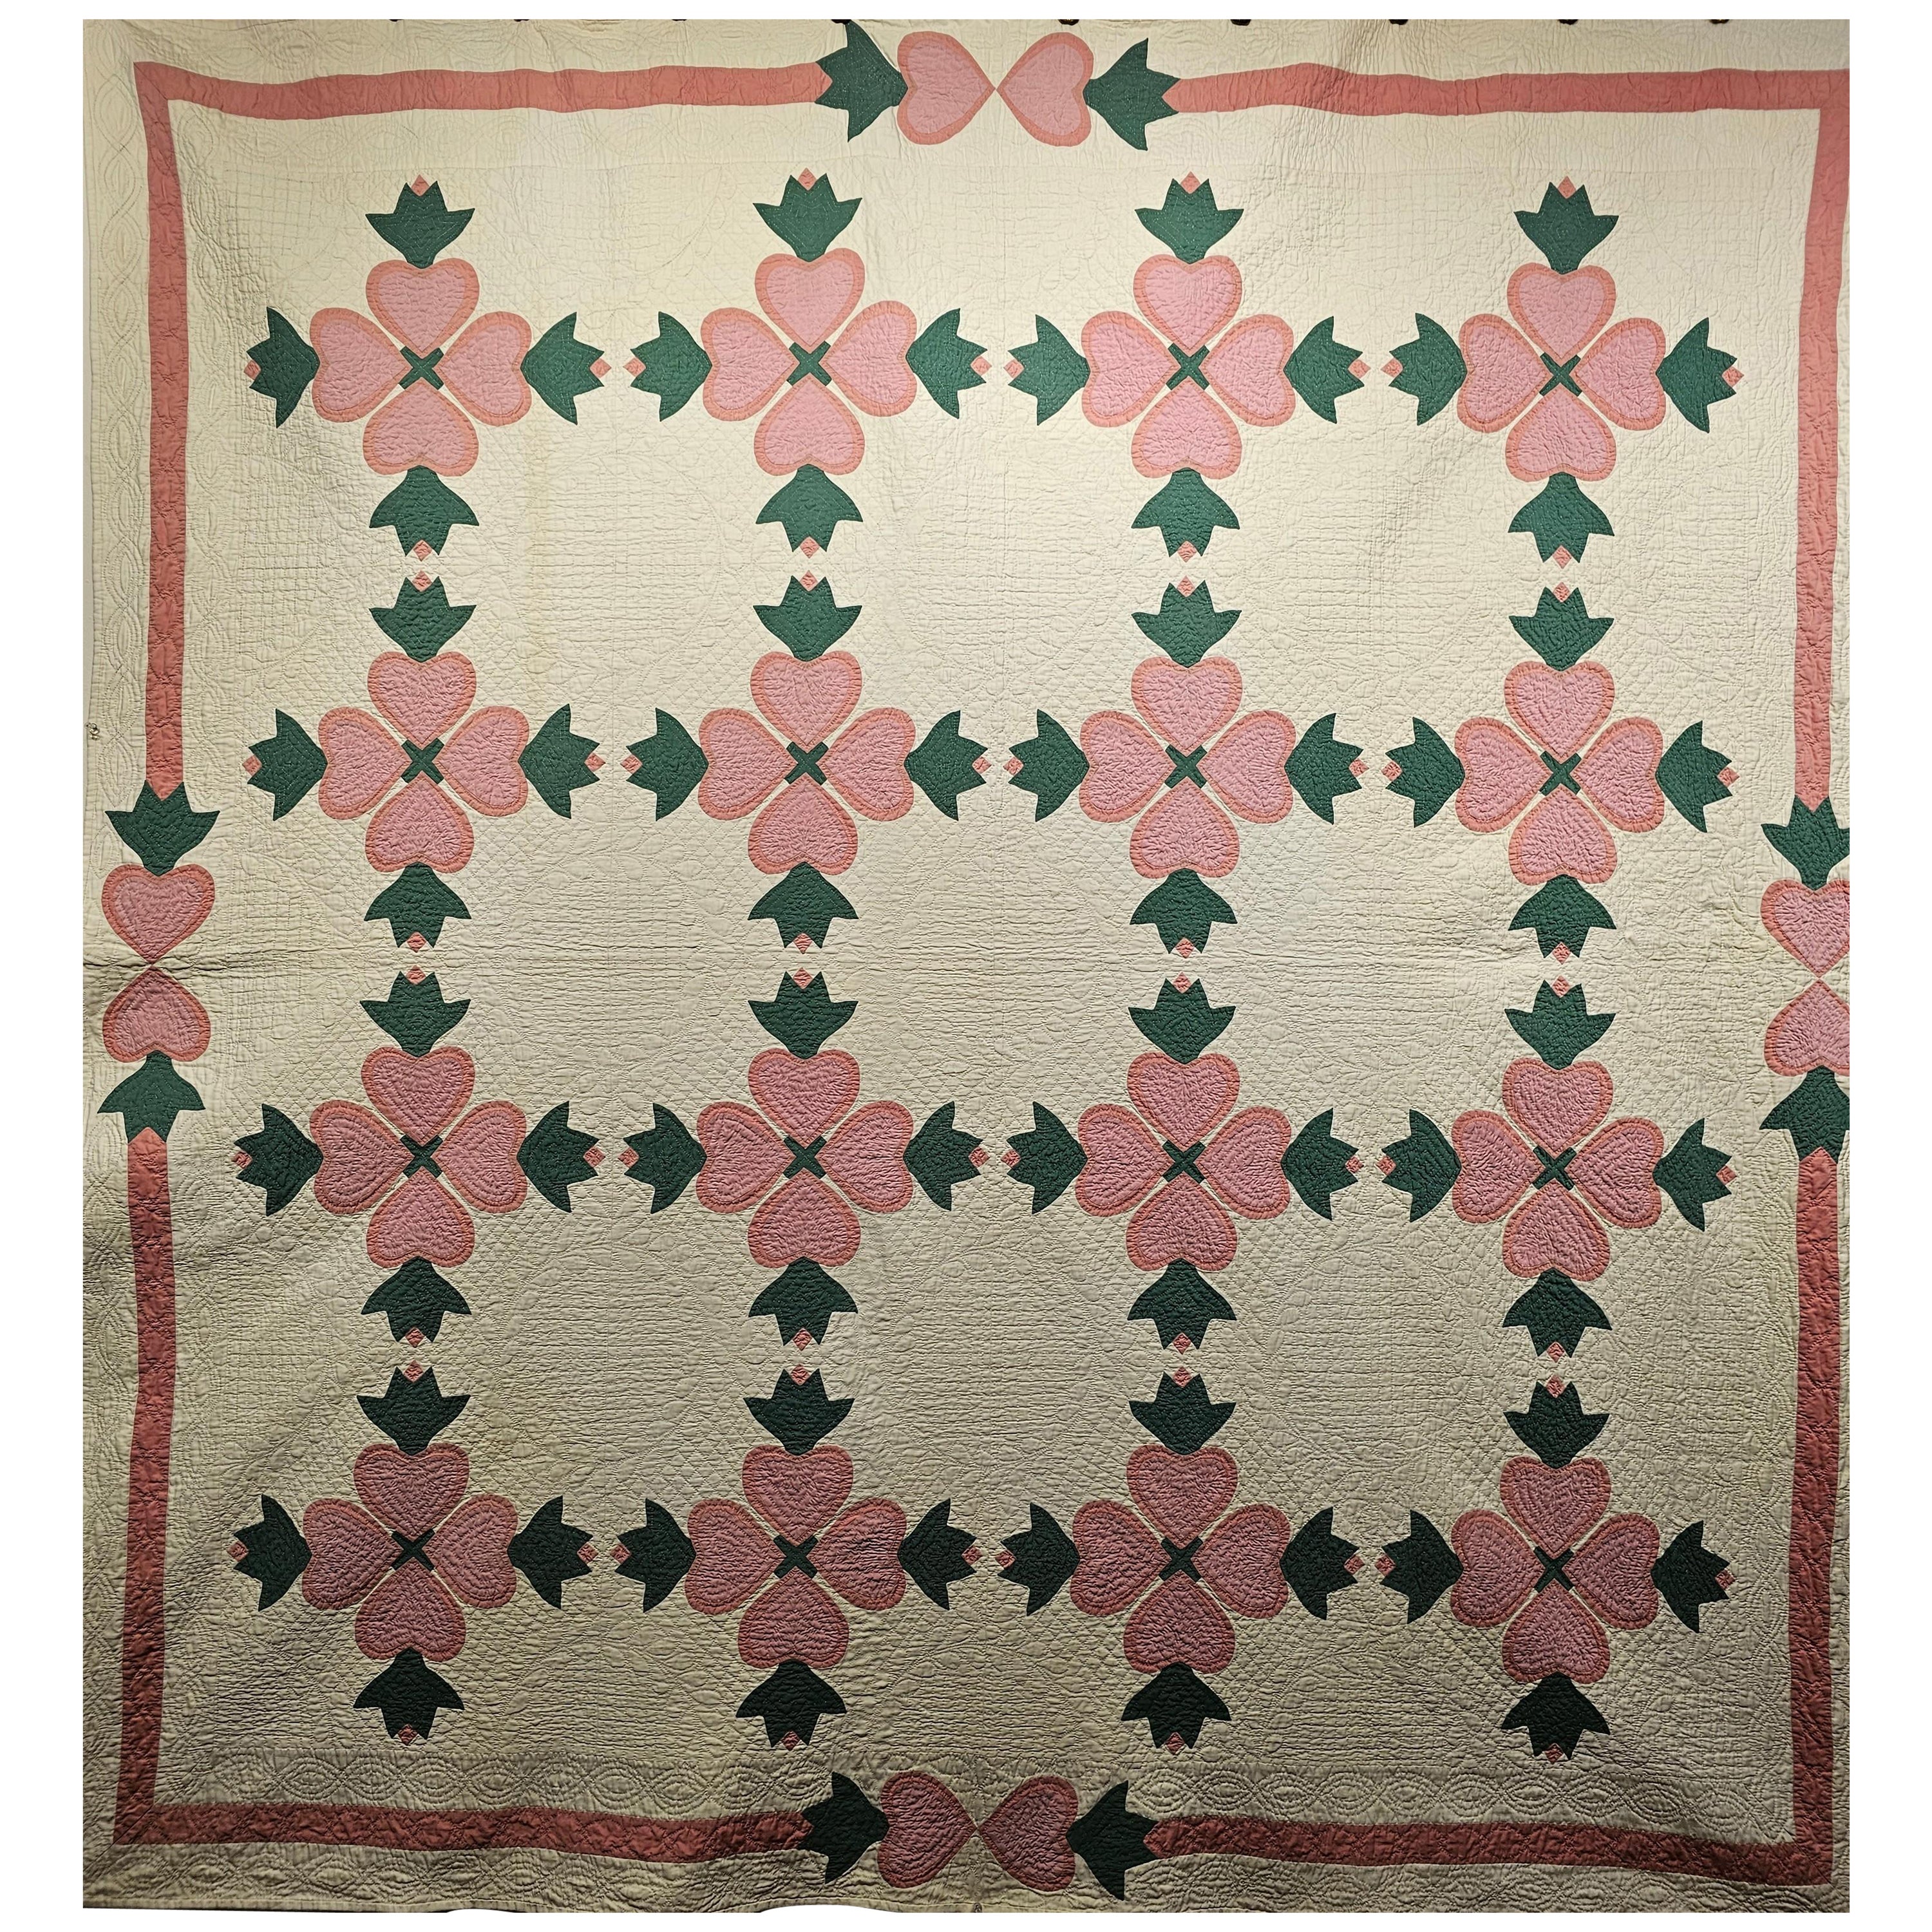 19th Century American Applique Quilt in Hearts and Tulips Pattern in Ivory, Pink